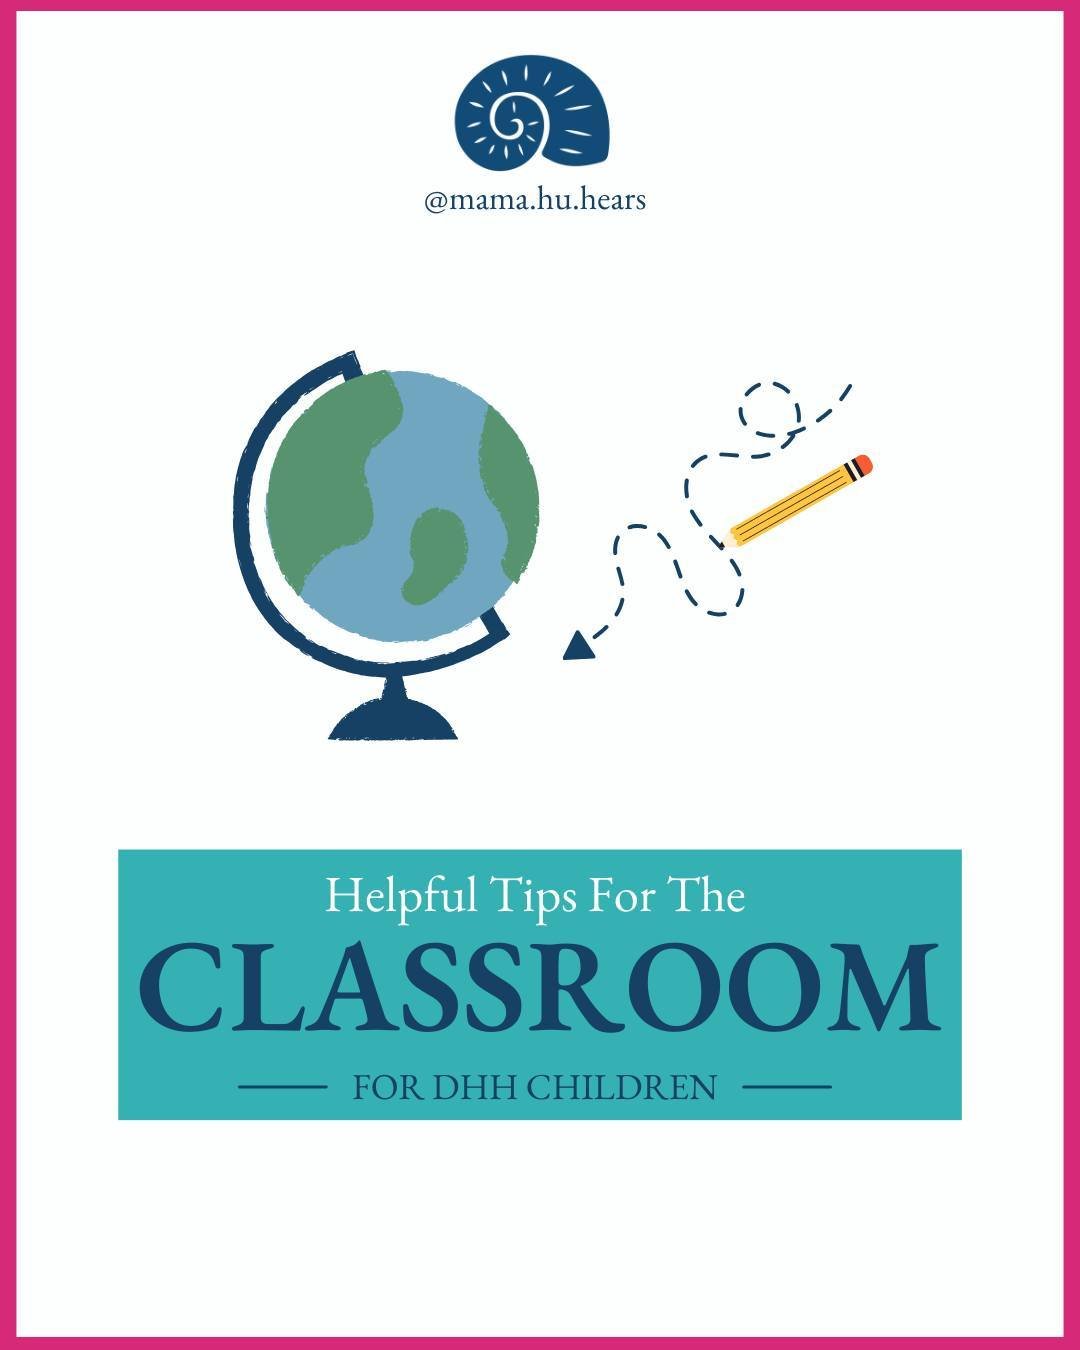 Here's a quick guide to help make a classroom a welcoming space for DHH students. From visual accessibility and supplemental materials to speaker responsibilities and technology, we've got you covered!

Swipe through for helpful tips and let me know 